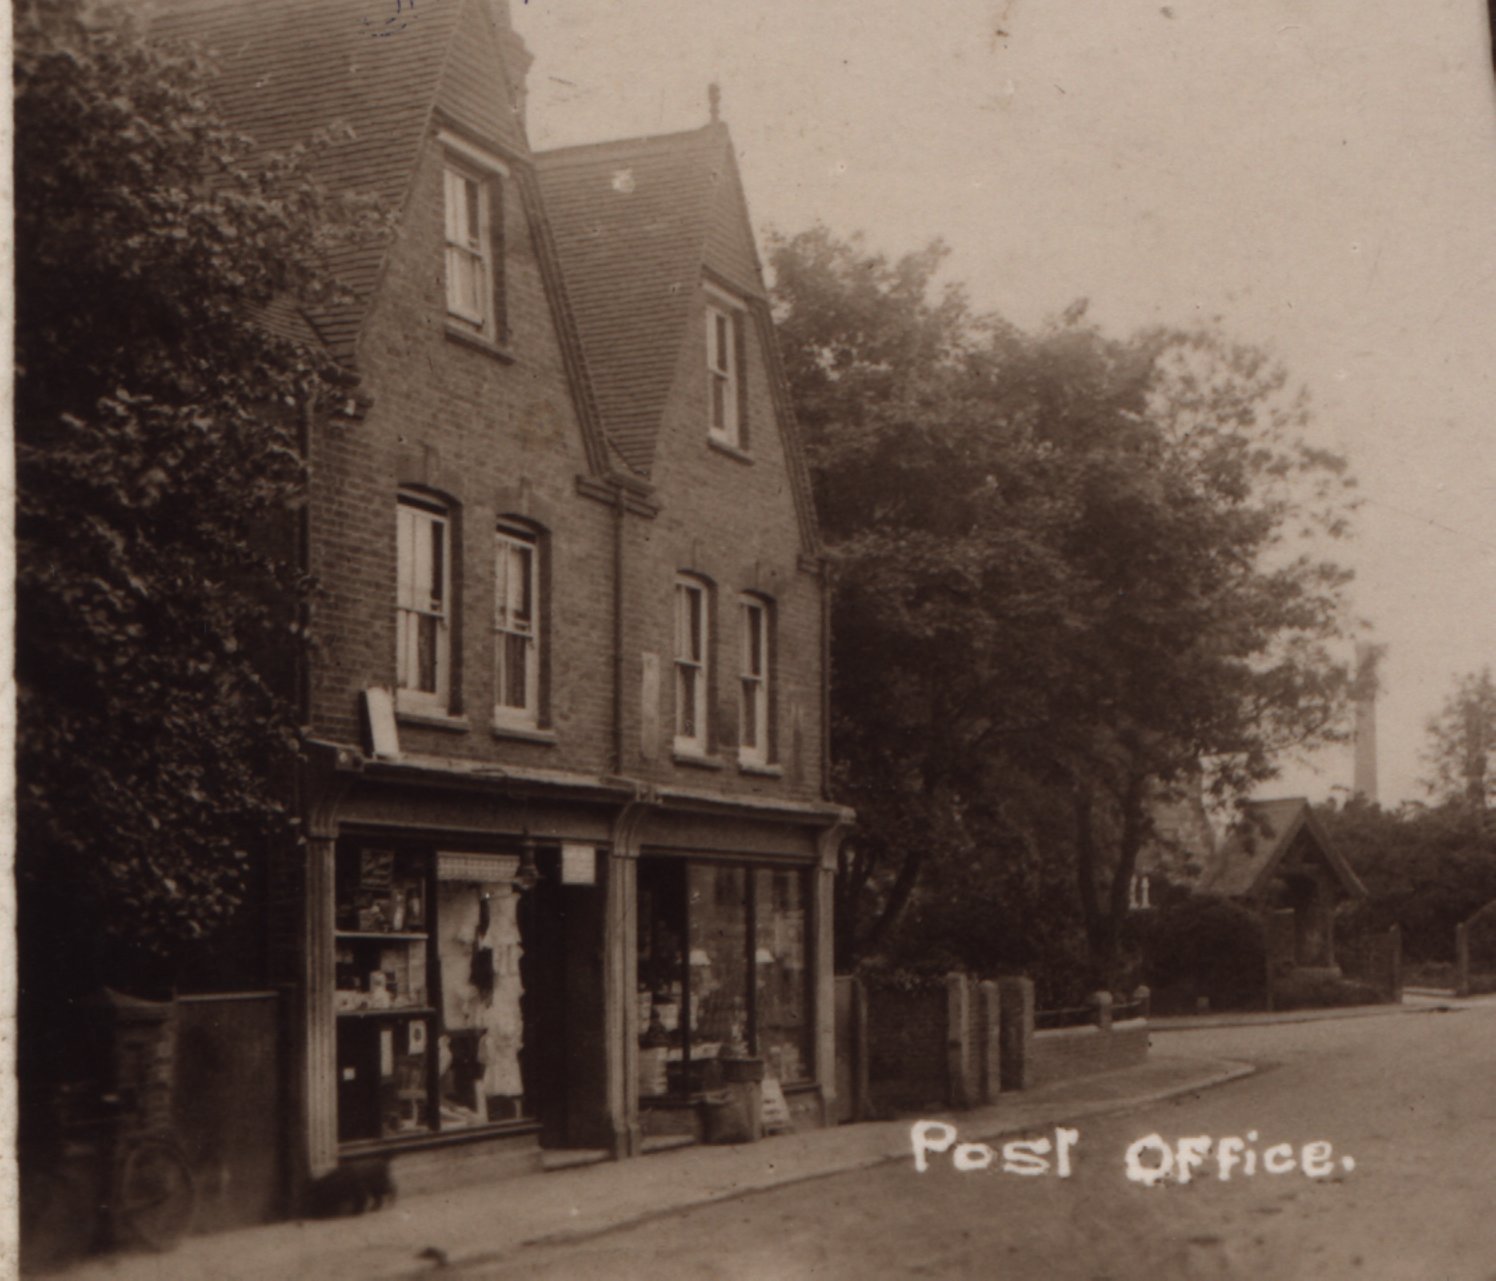 The Post Office, previously two shops.